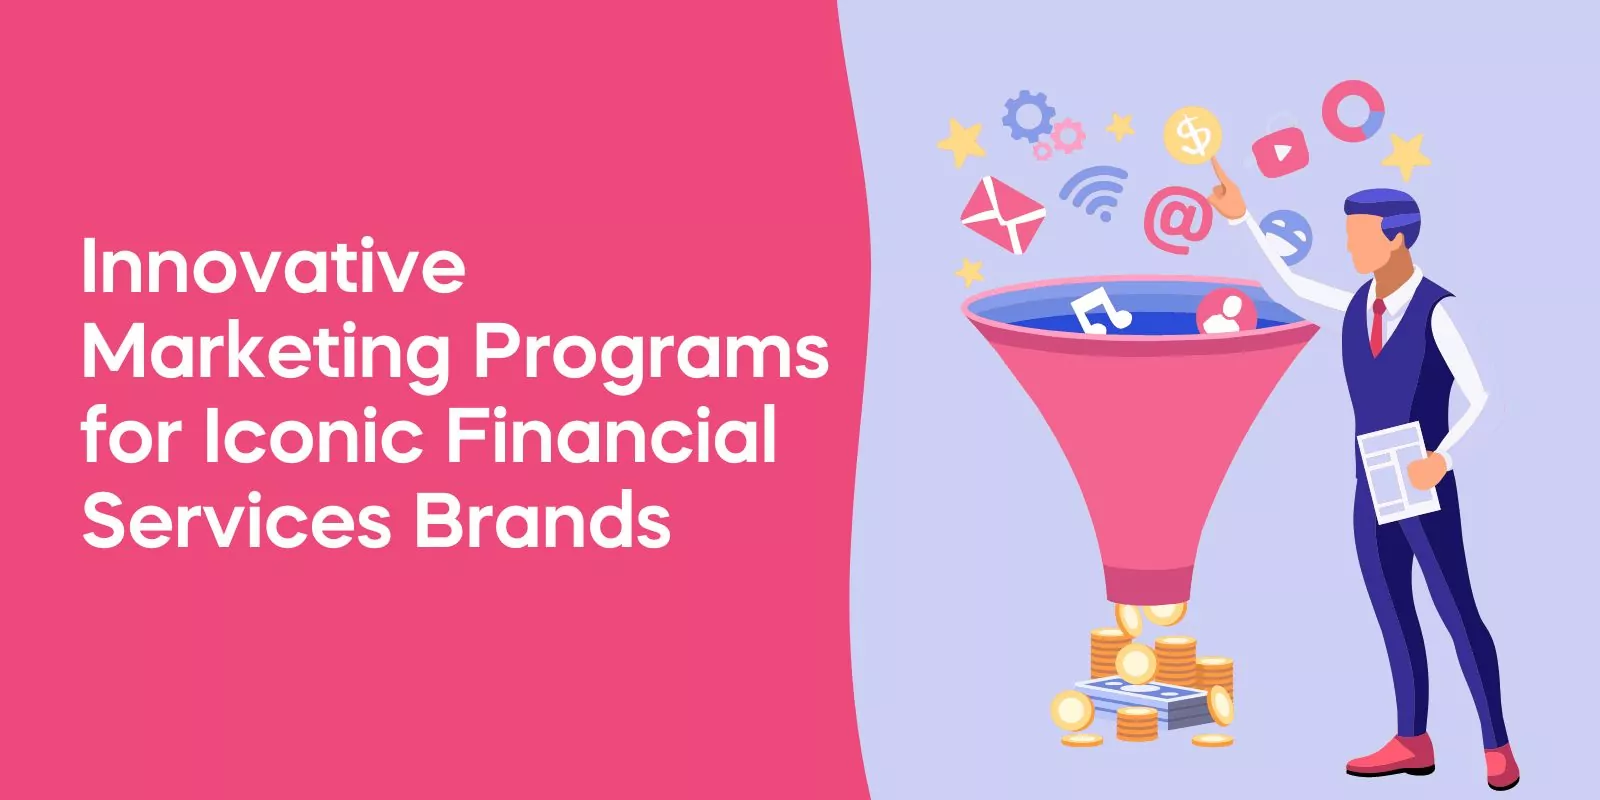 Innovative Marketing Programs for Iconic Financial Services Brands